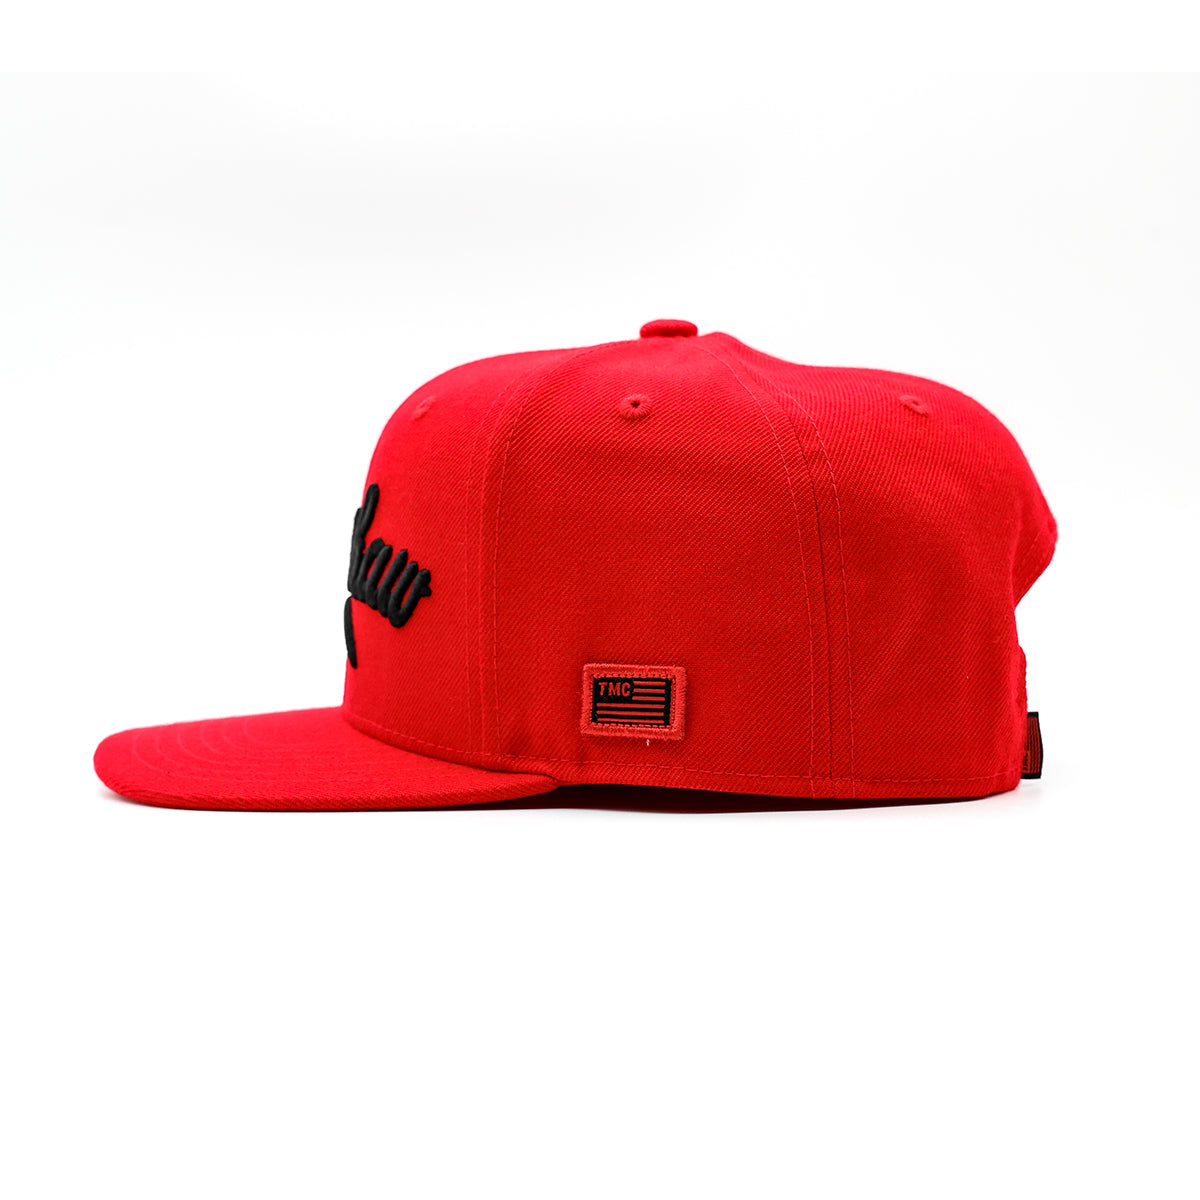 Crenshaw Limited Edition Snapback - Red/Black - Side